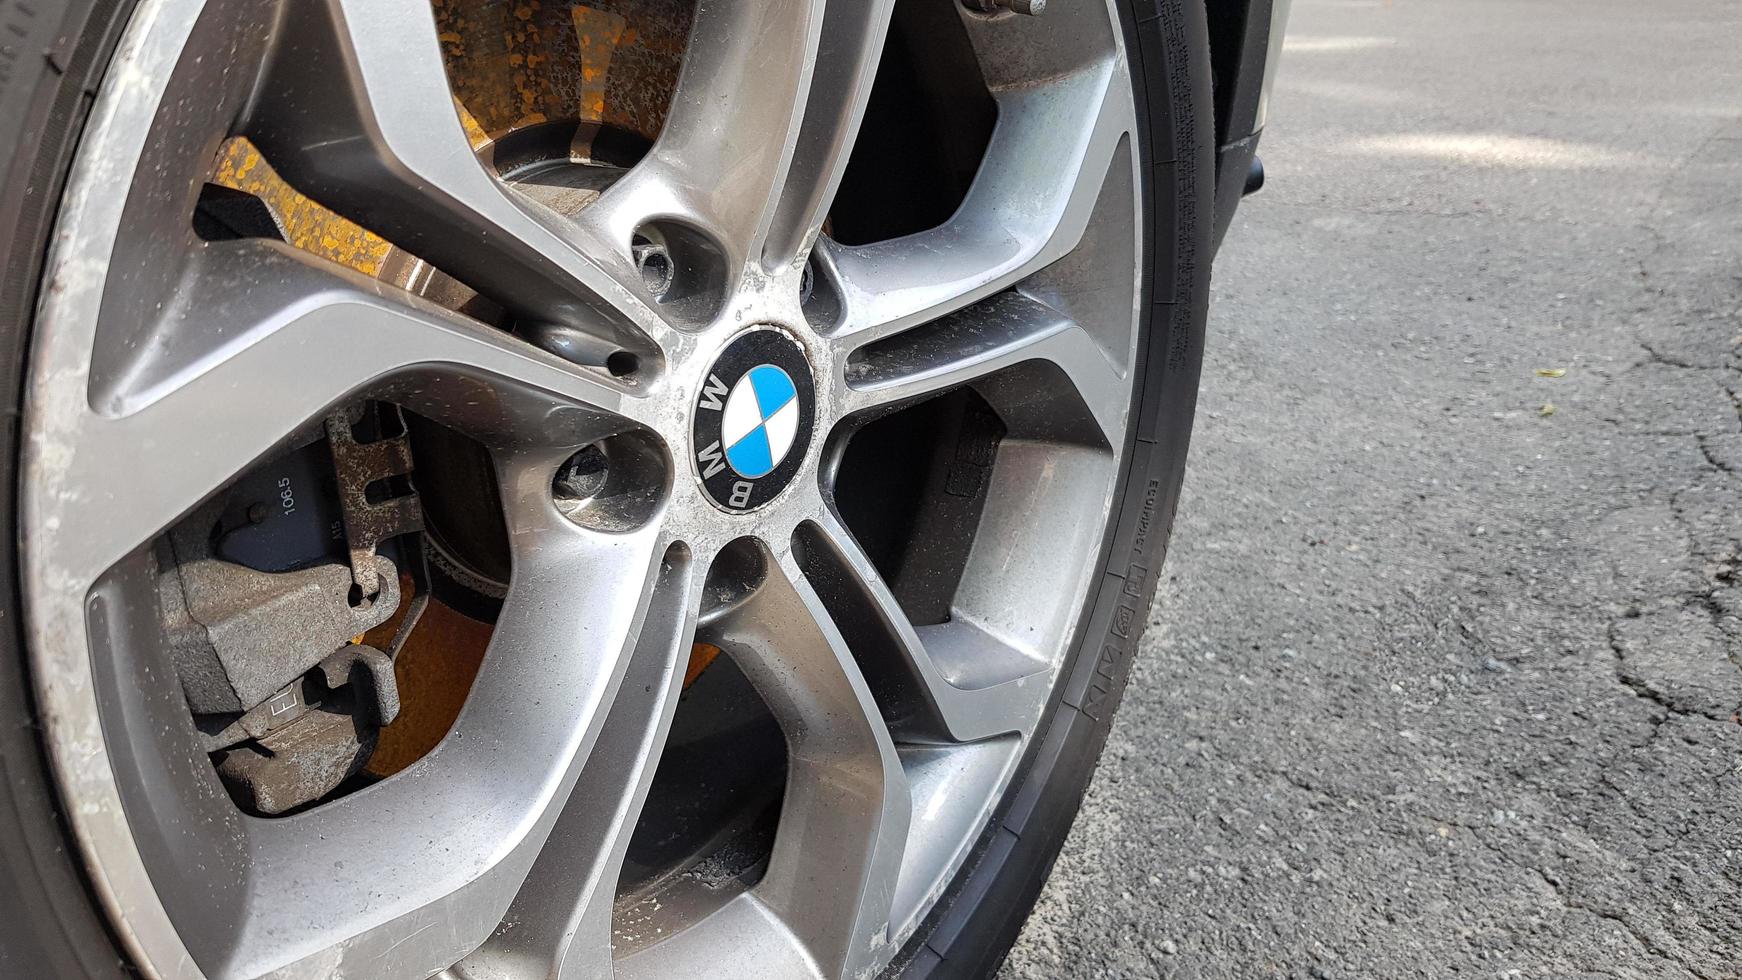 Ukraine, Kiev - August 28,2019. Original BMW alloy wheel dirty and scratched with tires on a car close-up photo